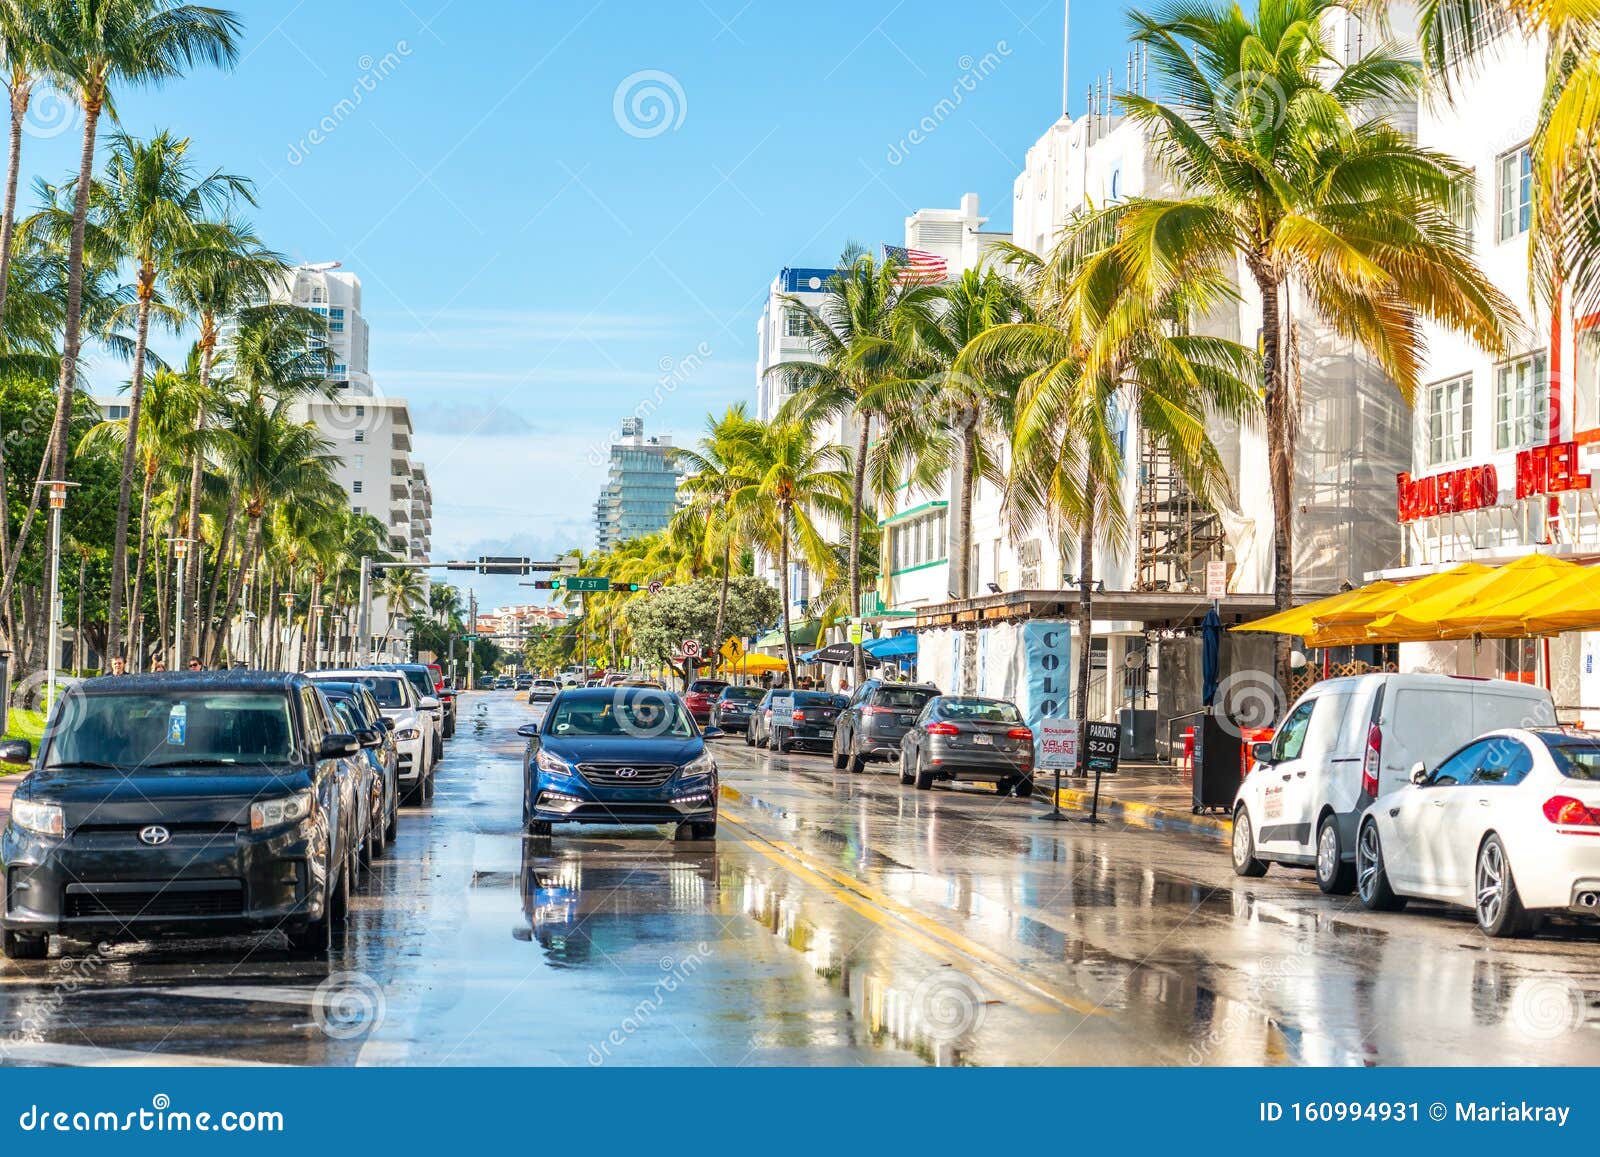 Miami, USA September 09, 2019 Ocean Drive Street after Rain in the